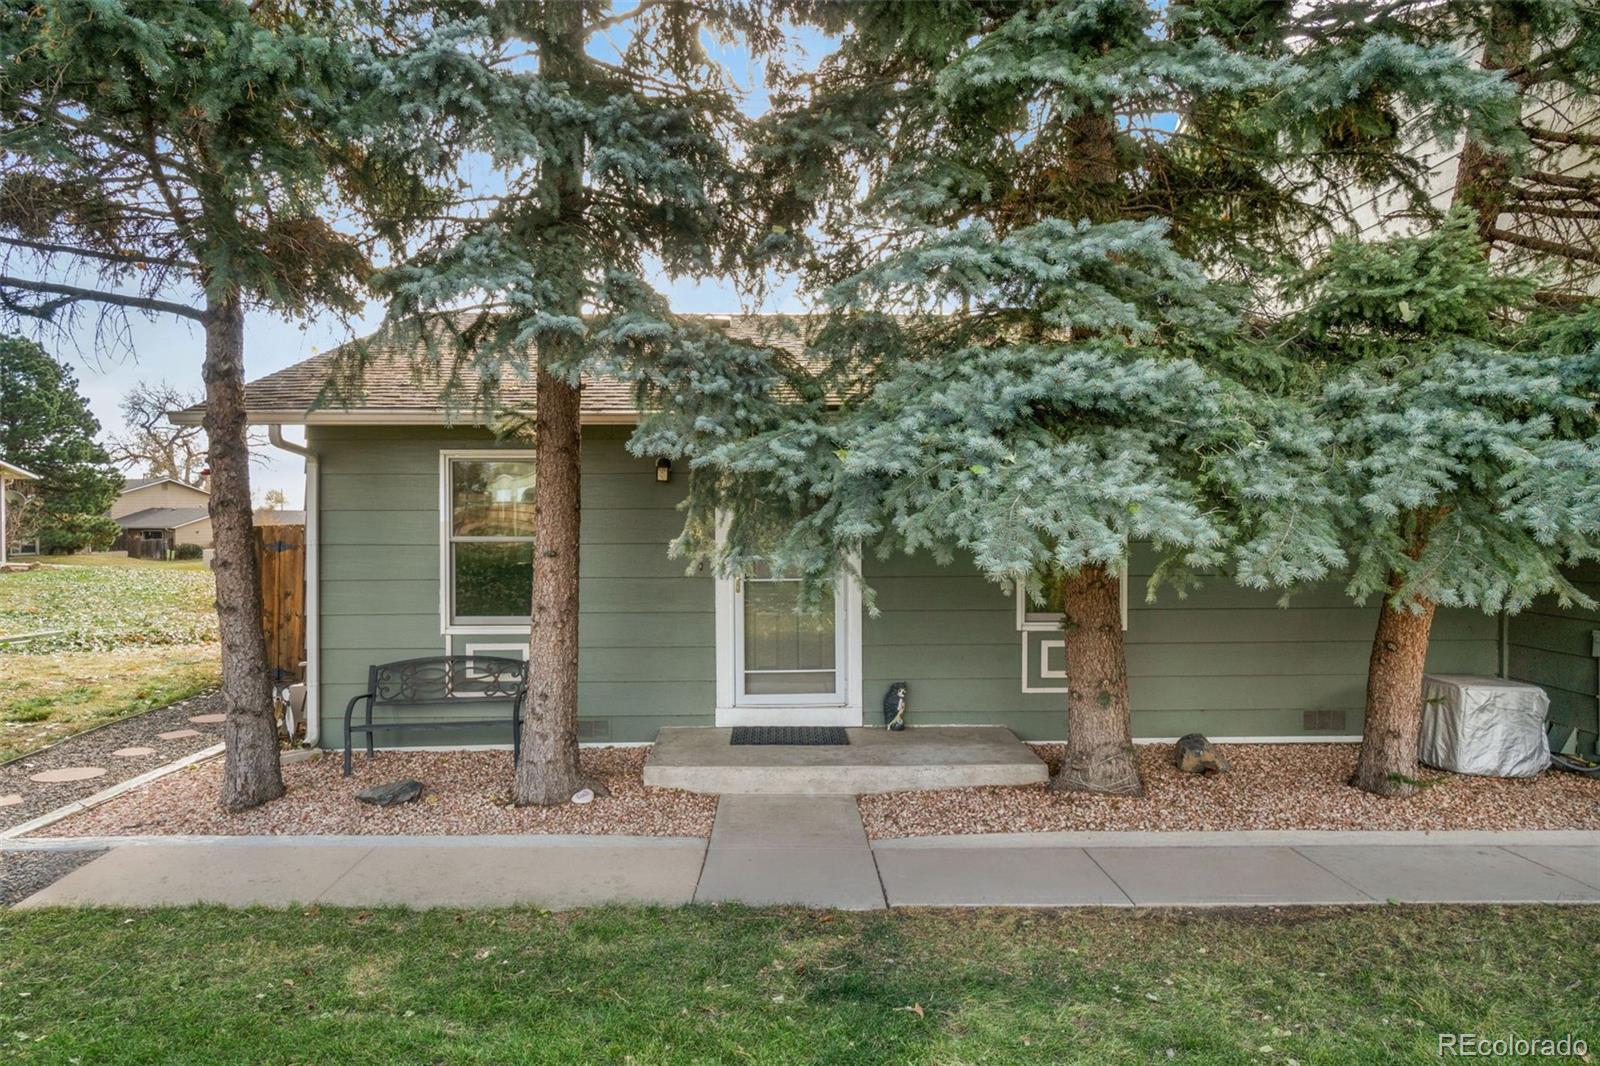 2111  coronado parkway, Denver sold home. Closed on 2023-12-29 for $310,000.